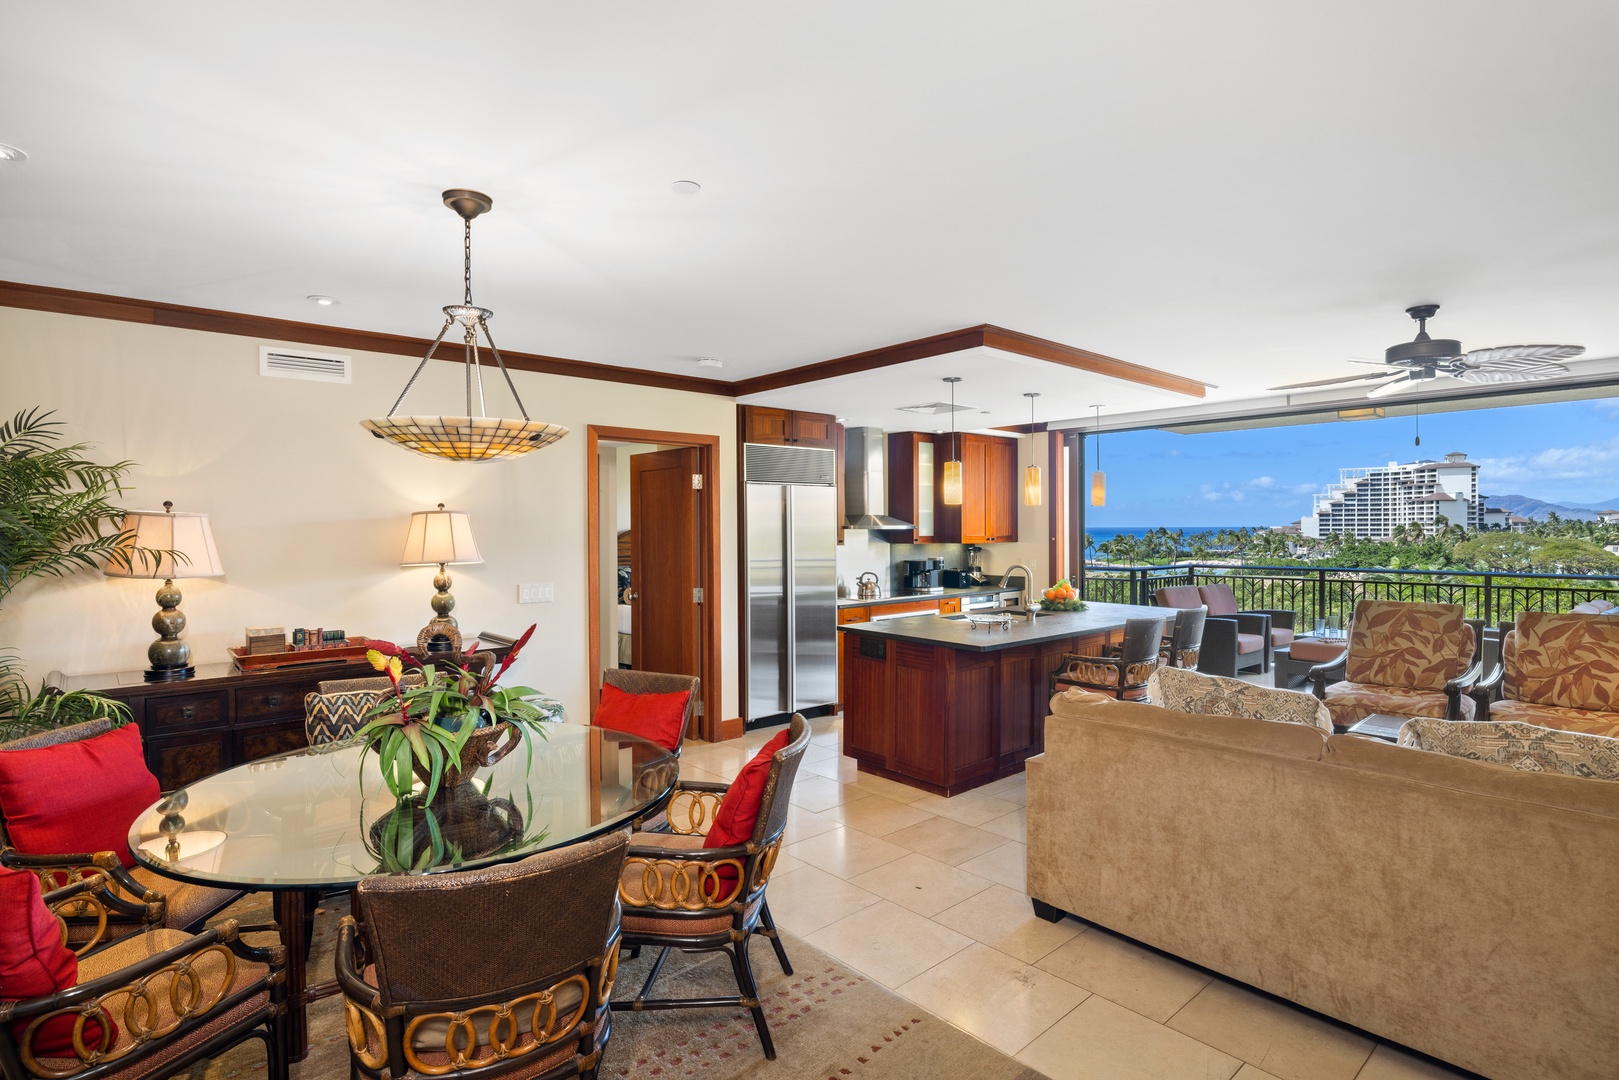 Kapolei Vacation Rentals, Ko Olina Beach Villas B602 - The decorative dining room with soft lighting and comfortable seating.